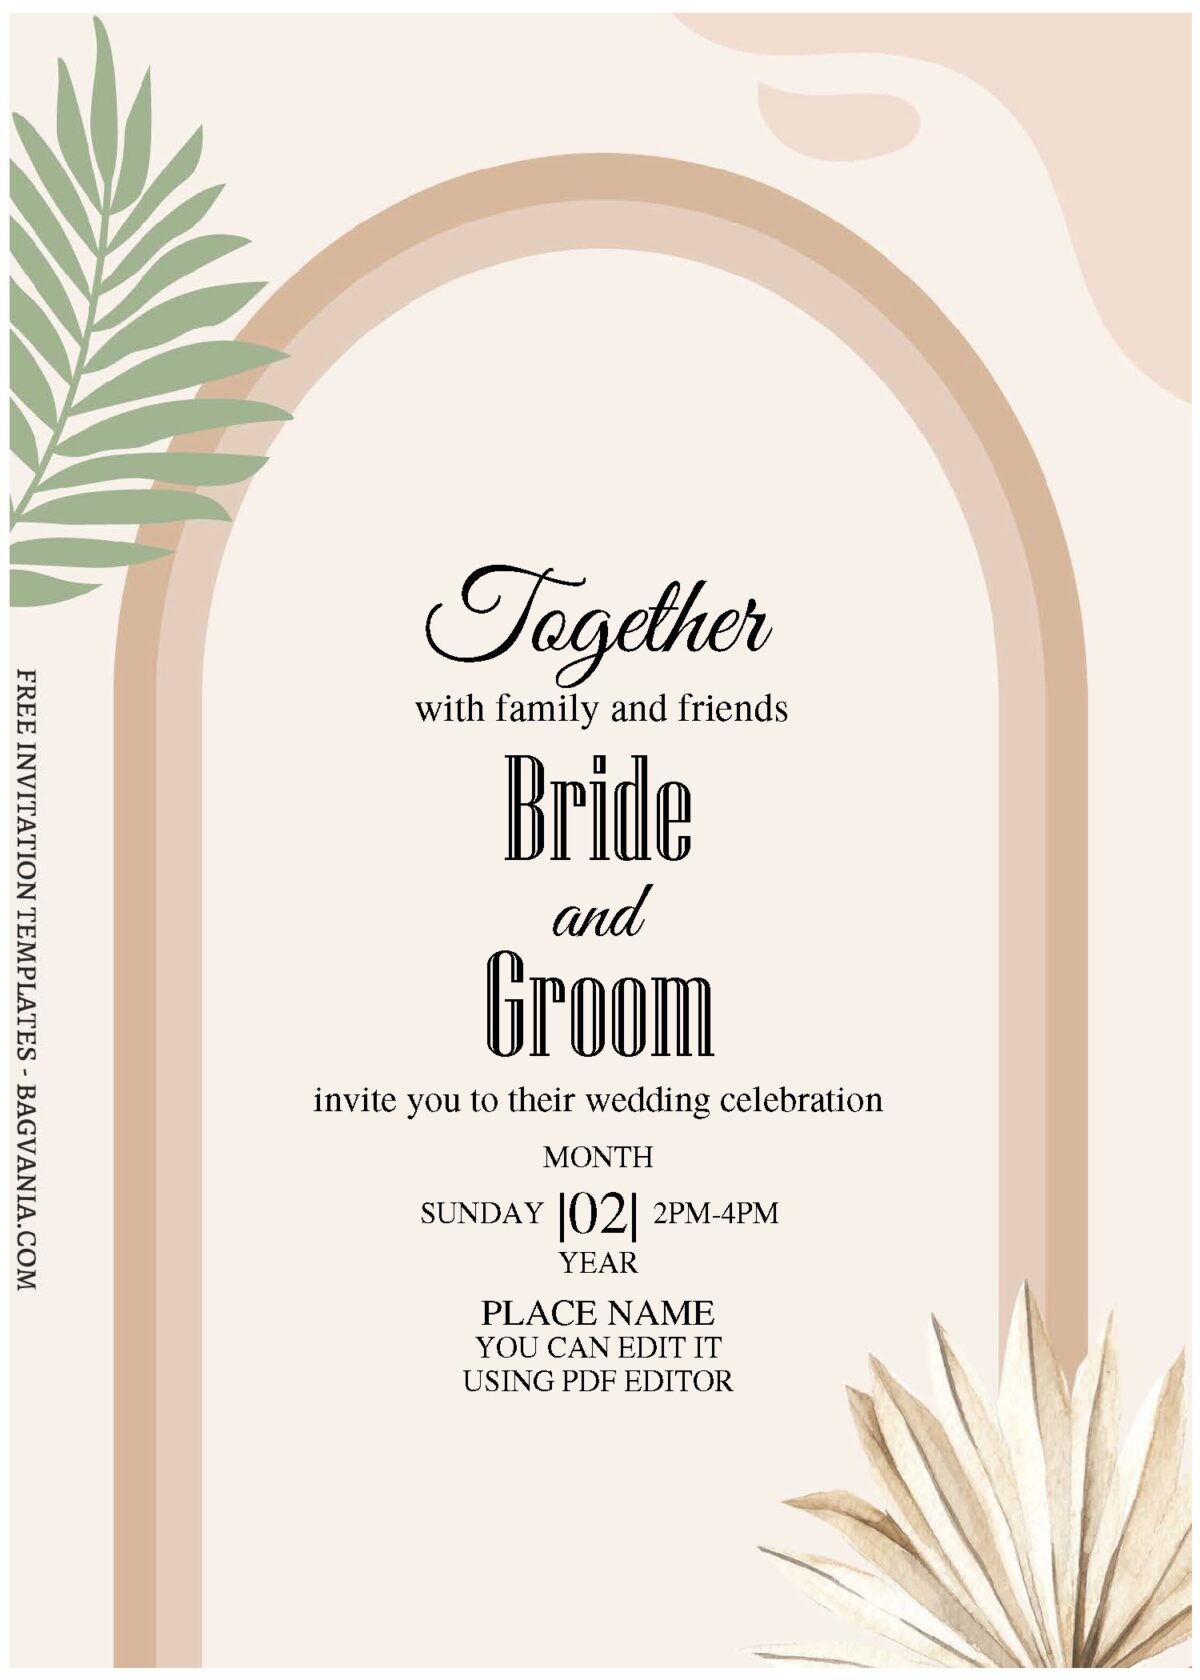 (Free Editable PDF) Greenery Arch Wedding Invitation Templates with rustic wooden arch